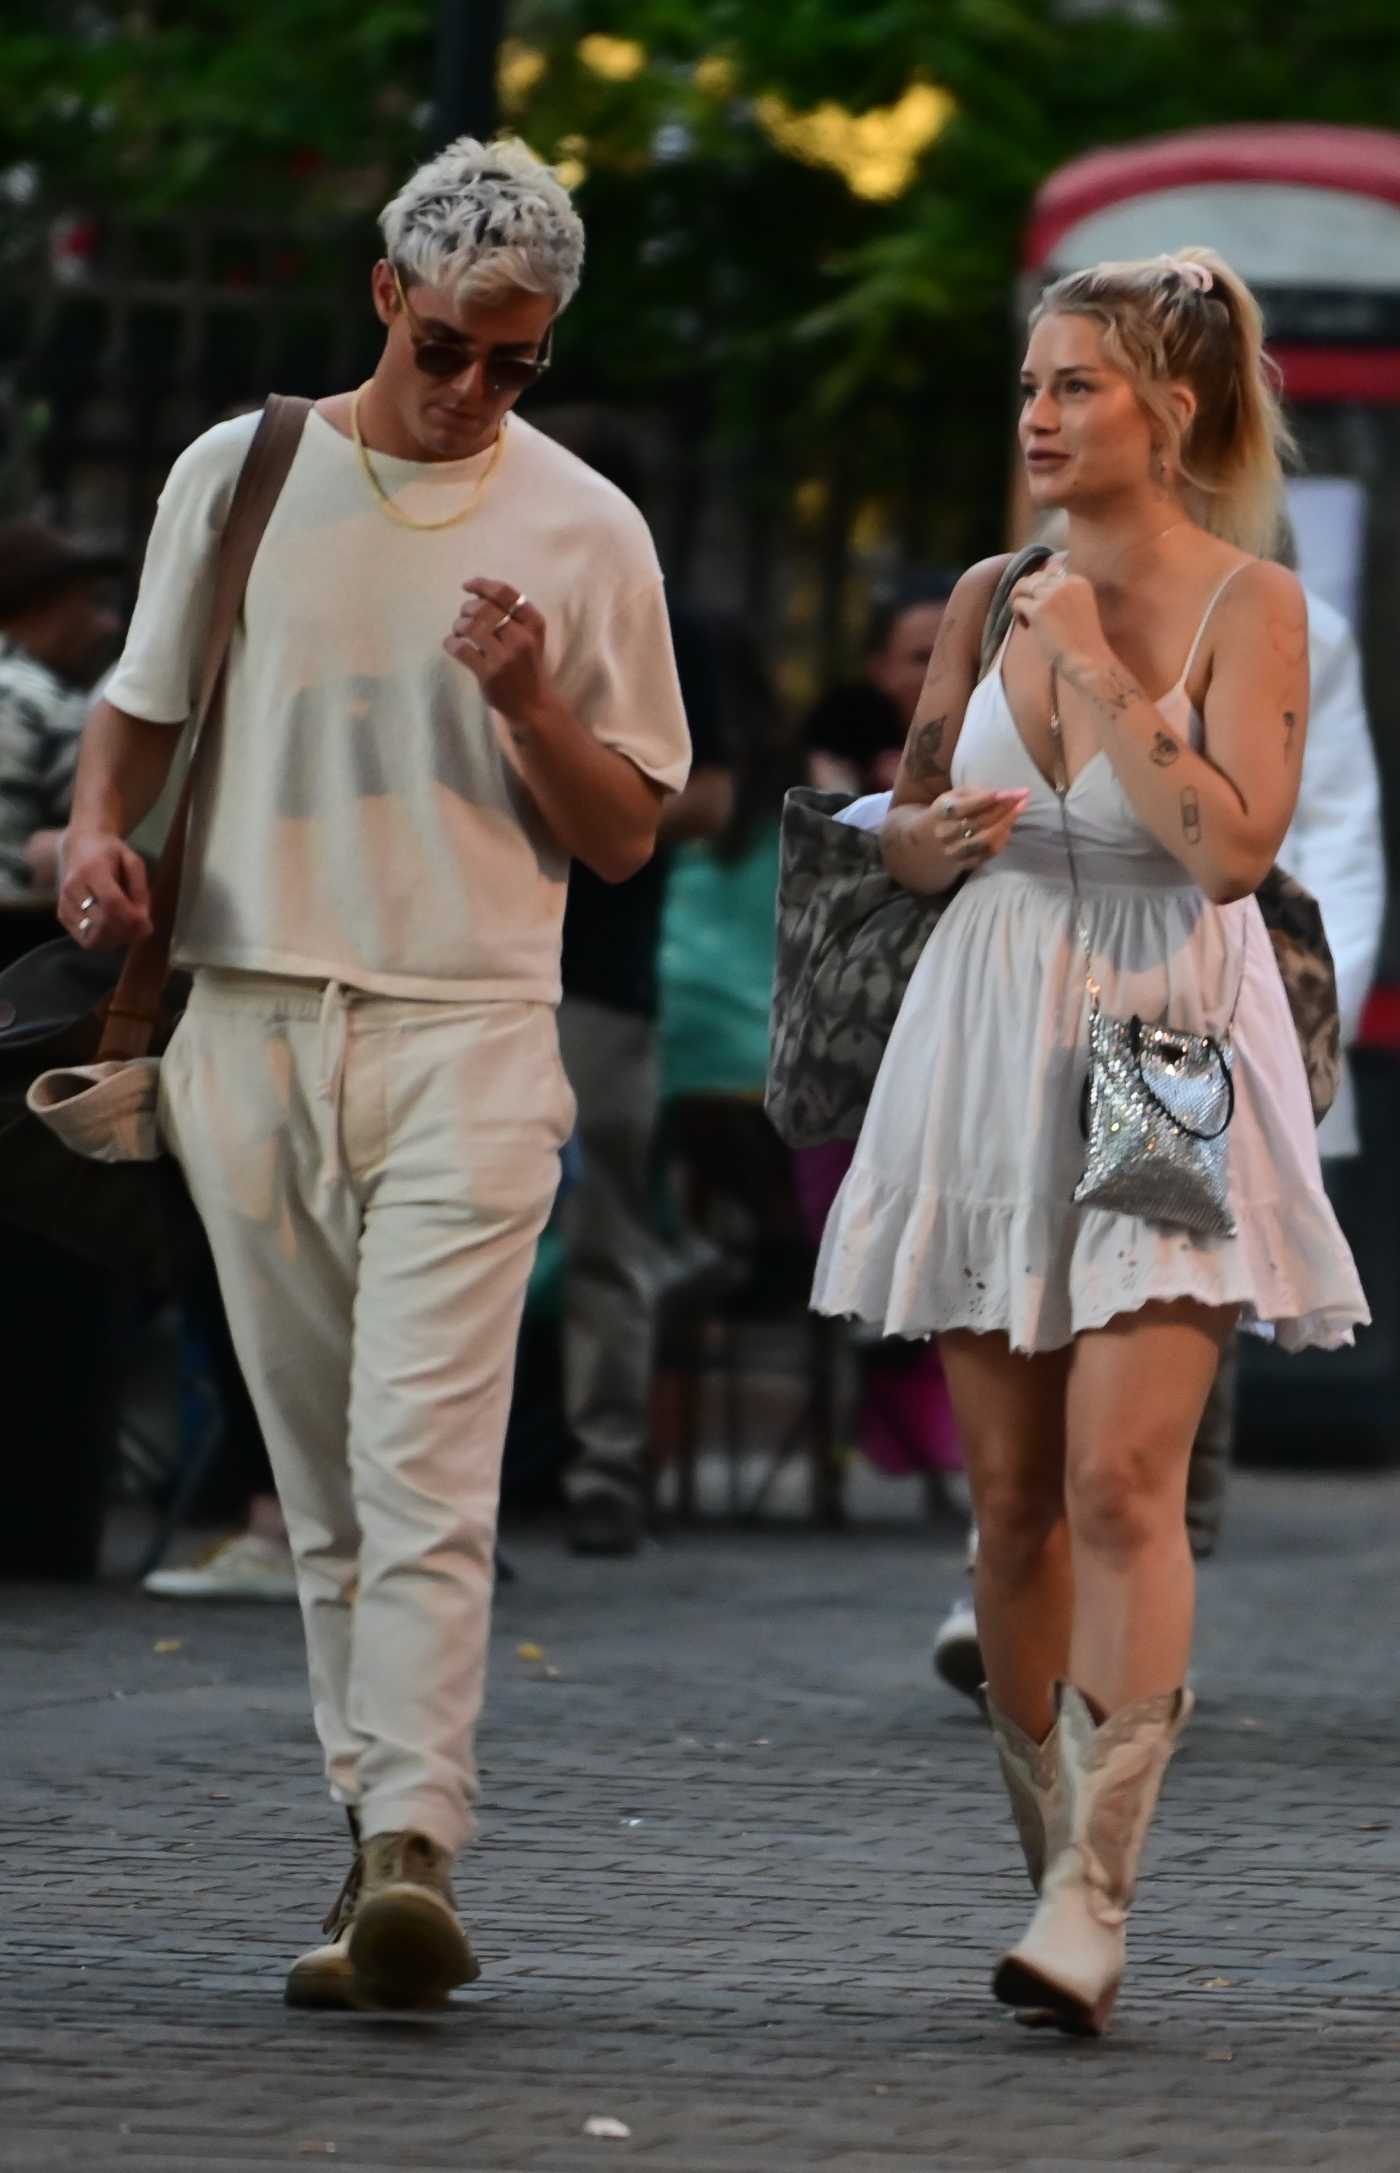 Lottie Moss in a White Dress Was Seen Out with Mystery Man in London 07/31/2022